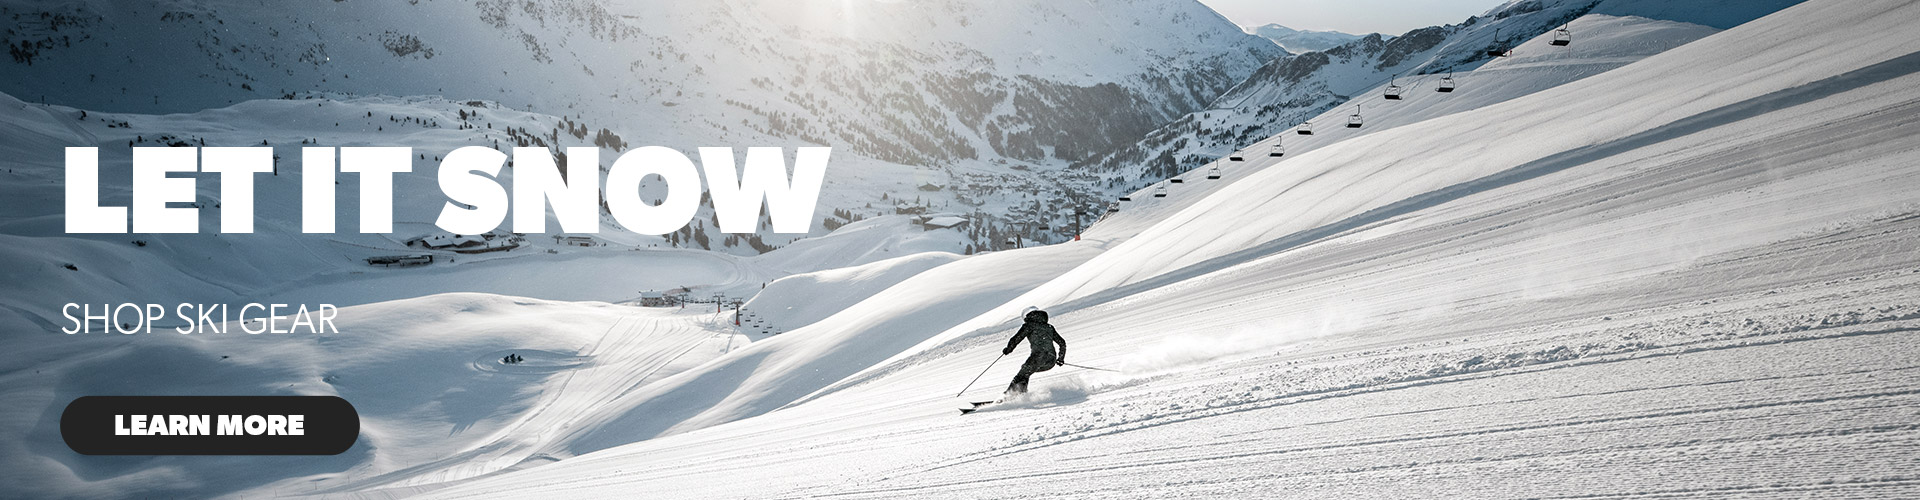 Shop The Latest & Greatest In Ski, Cross-Country, Snowboard, and Winter Jackets and Outerwear This Winter Season At Your Local Source For Sports Ski Store Near You.